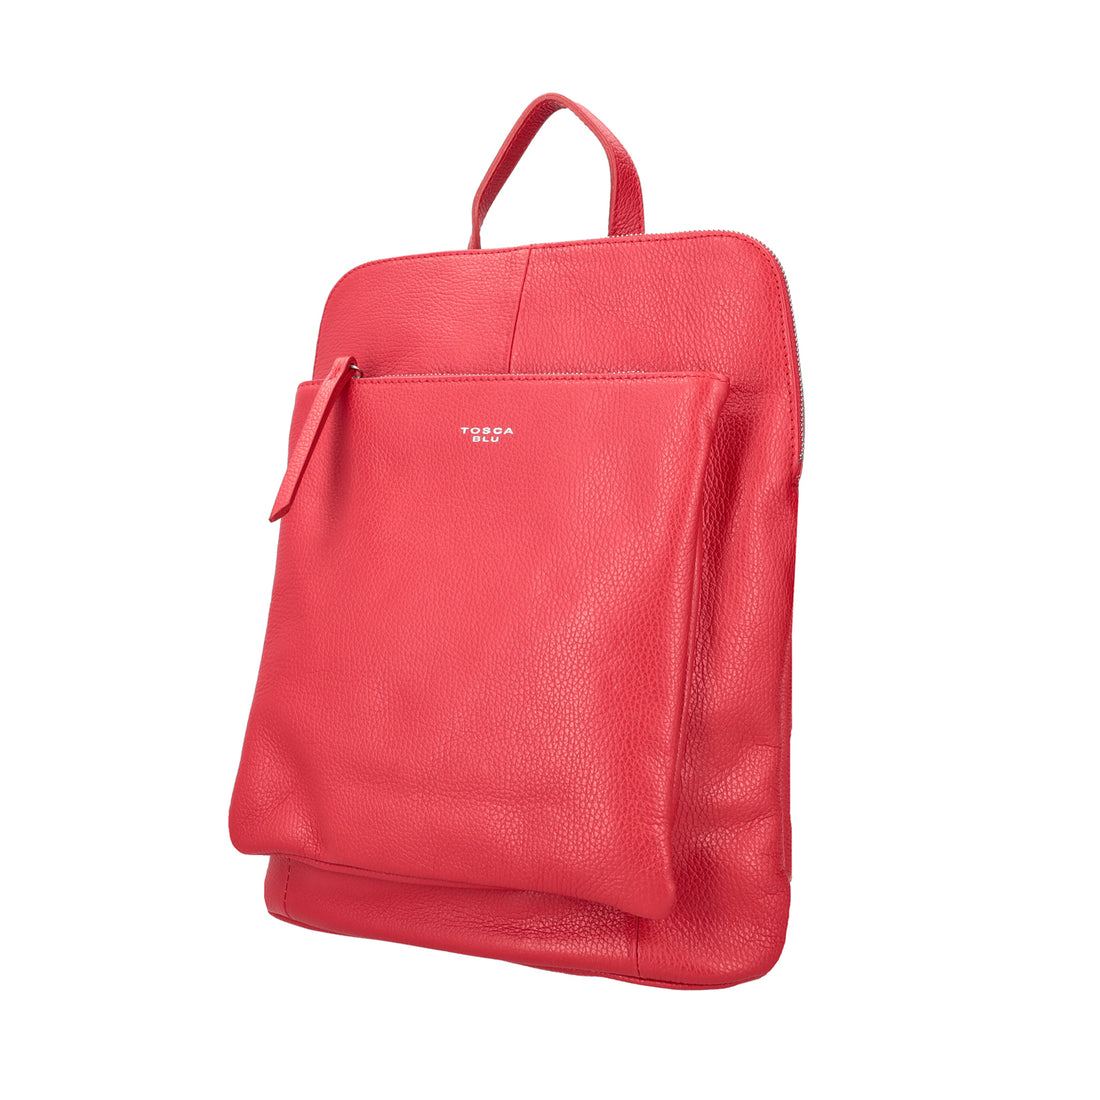 RED LEATHER BACKPACK WITH ZIPPER CLOSURE